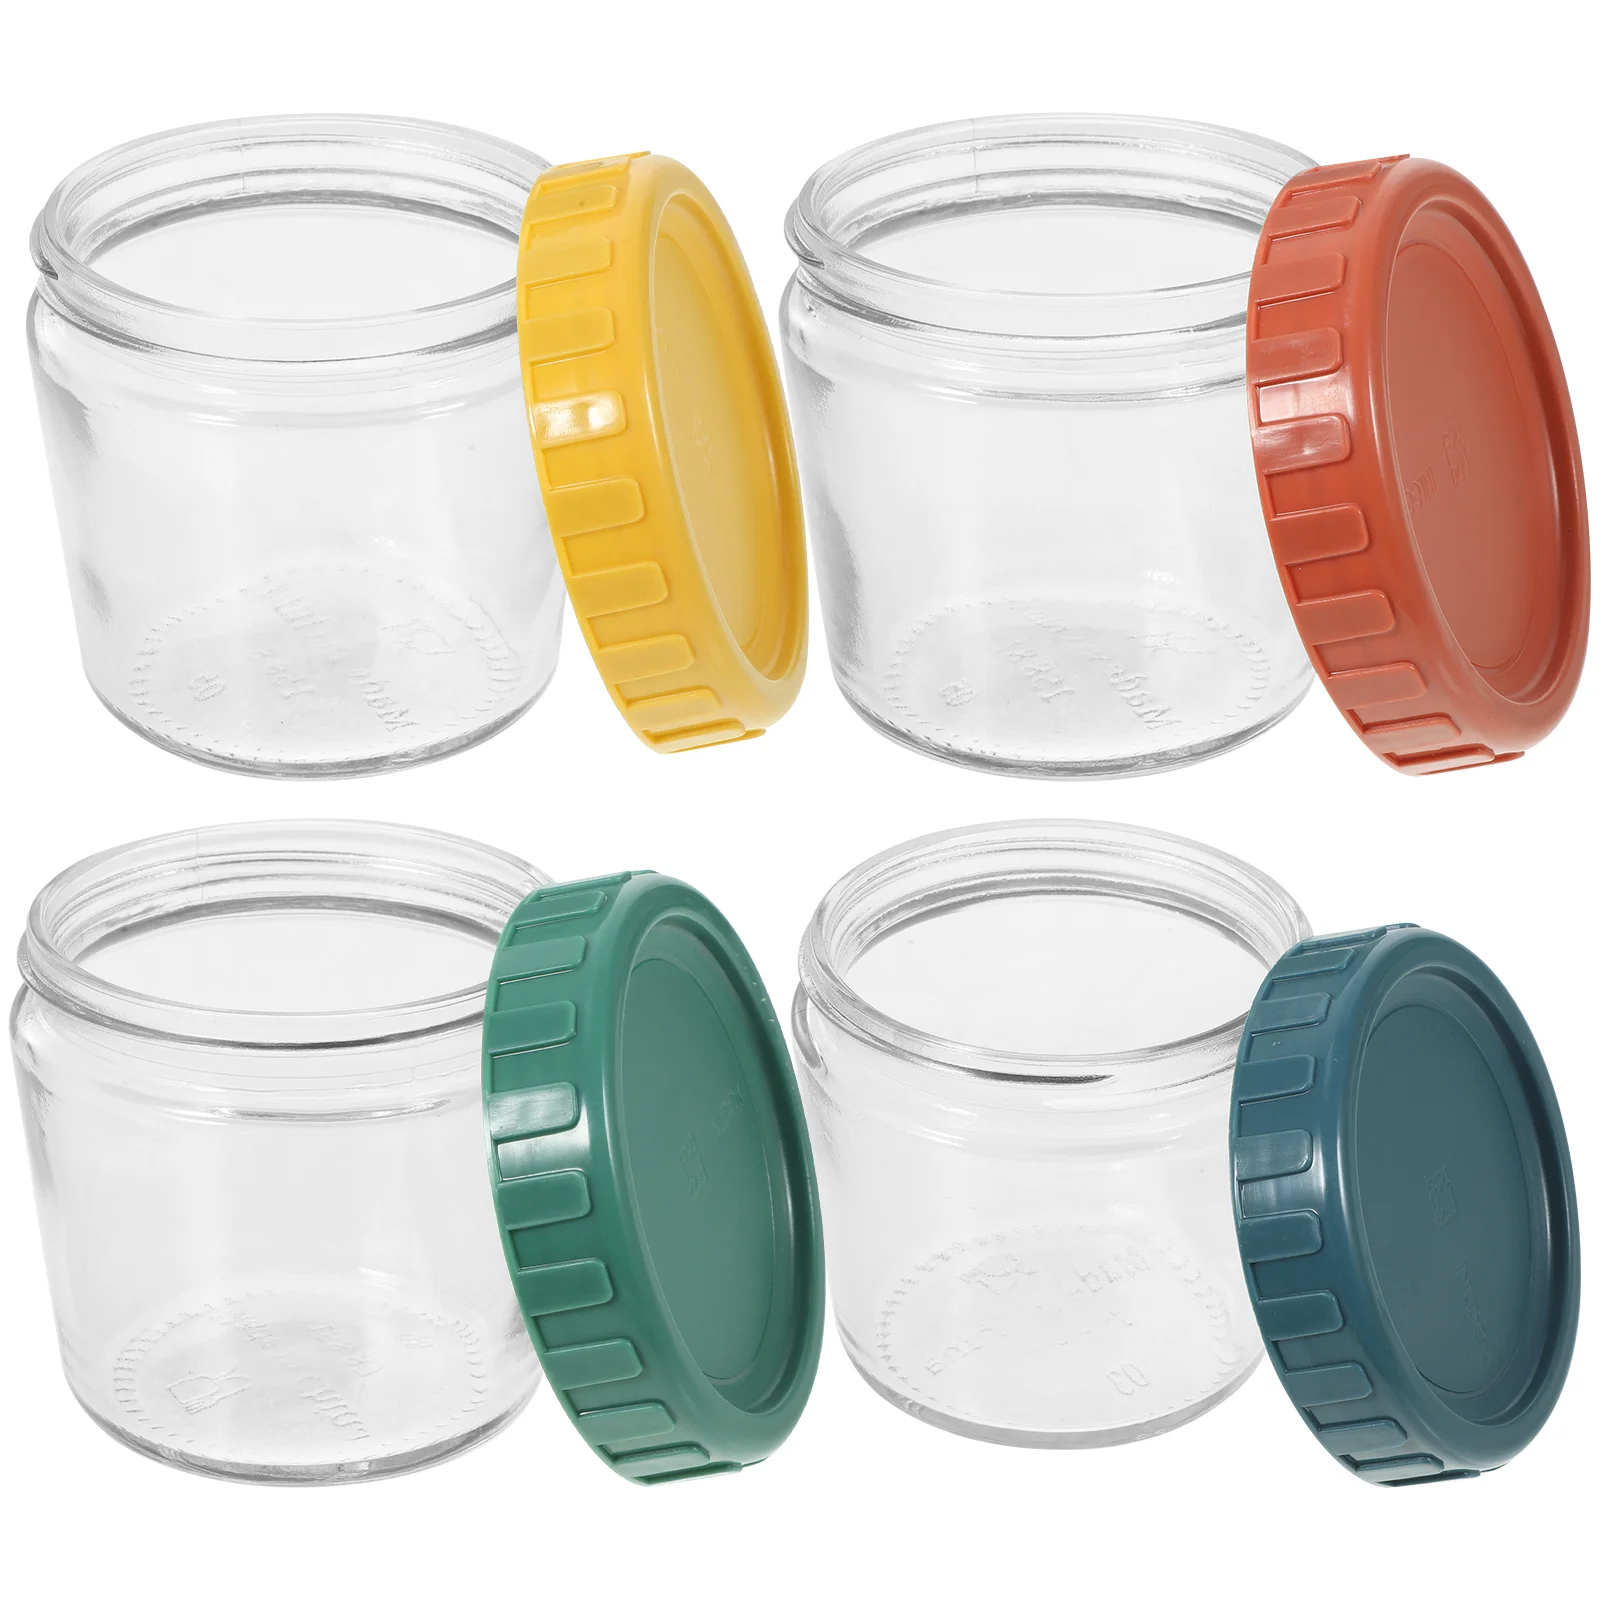 

4 Pcs Cereals Canister Coffee Beans Jar Food Containers Lids Sealed Glass Storage Yogurt Cup Sugar Jars